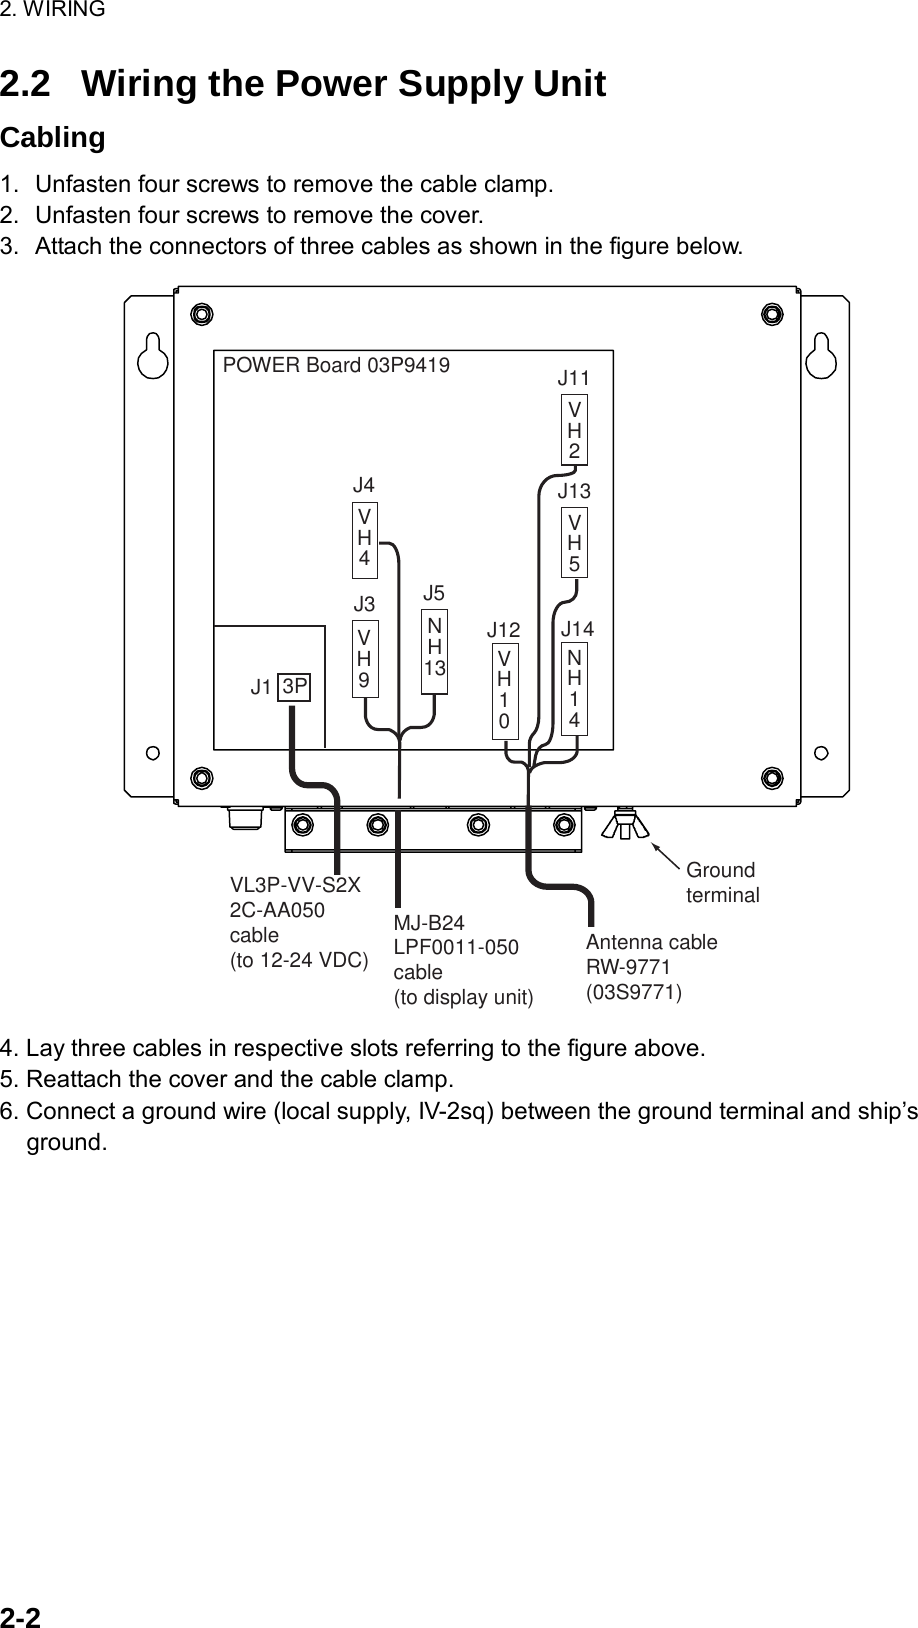 2. WIRING  2-2  2.2  Wiring the Power Supply Unit Cabling 1.  Unfasten four screws to remove the cable clamp. 2.  Unfasten four screws to remove the cover. 3.  Attach the connectors of three cables as shown in the figure below. POWER Board 03P9419J1 3PVL3P-VV-S2X2C-AA050cable(to 12-24 VDC)MJ-B24 LPF0011-050cable(to display unit)VH9NH13VH4J3J4J5Ground terminalVH10J12NH14J14VH5J13VH2J11Antenna cableRW-9771(03S9771) 4. Lay three cables in respective slots referring to the figure above. 5. Reattach the cover and the cable clamp. 6. Connect a ground wire (local supply, IV-2sq) between the ground terminal and ship’s ground. 